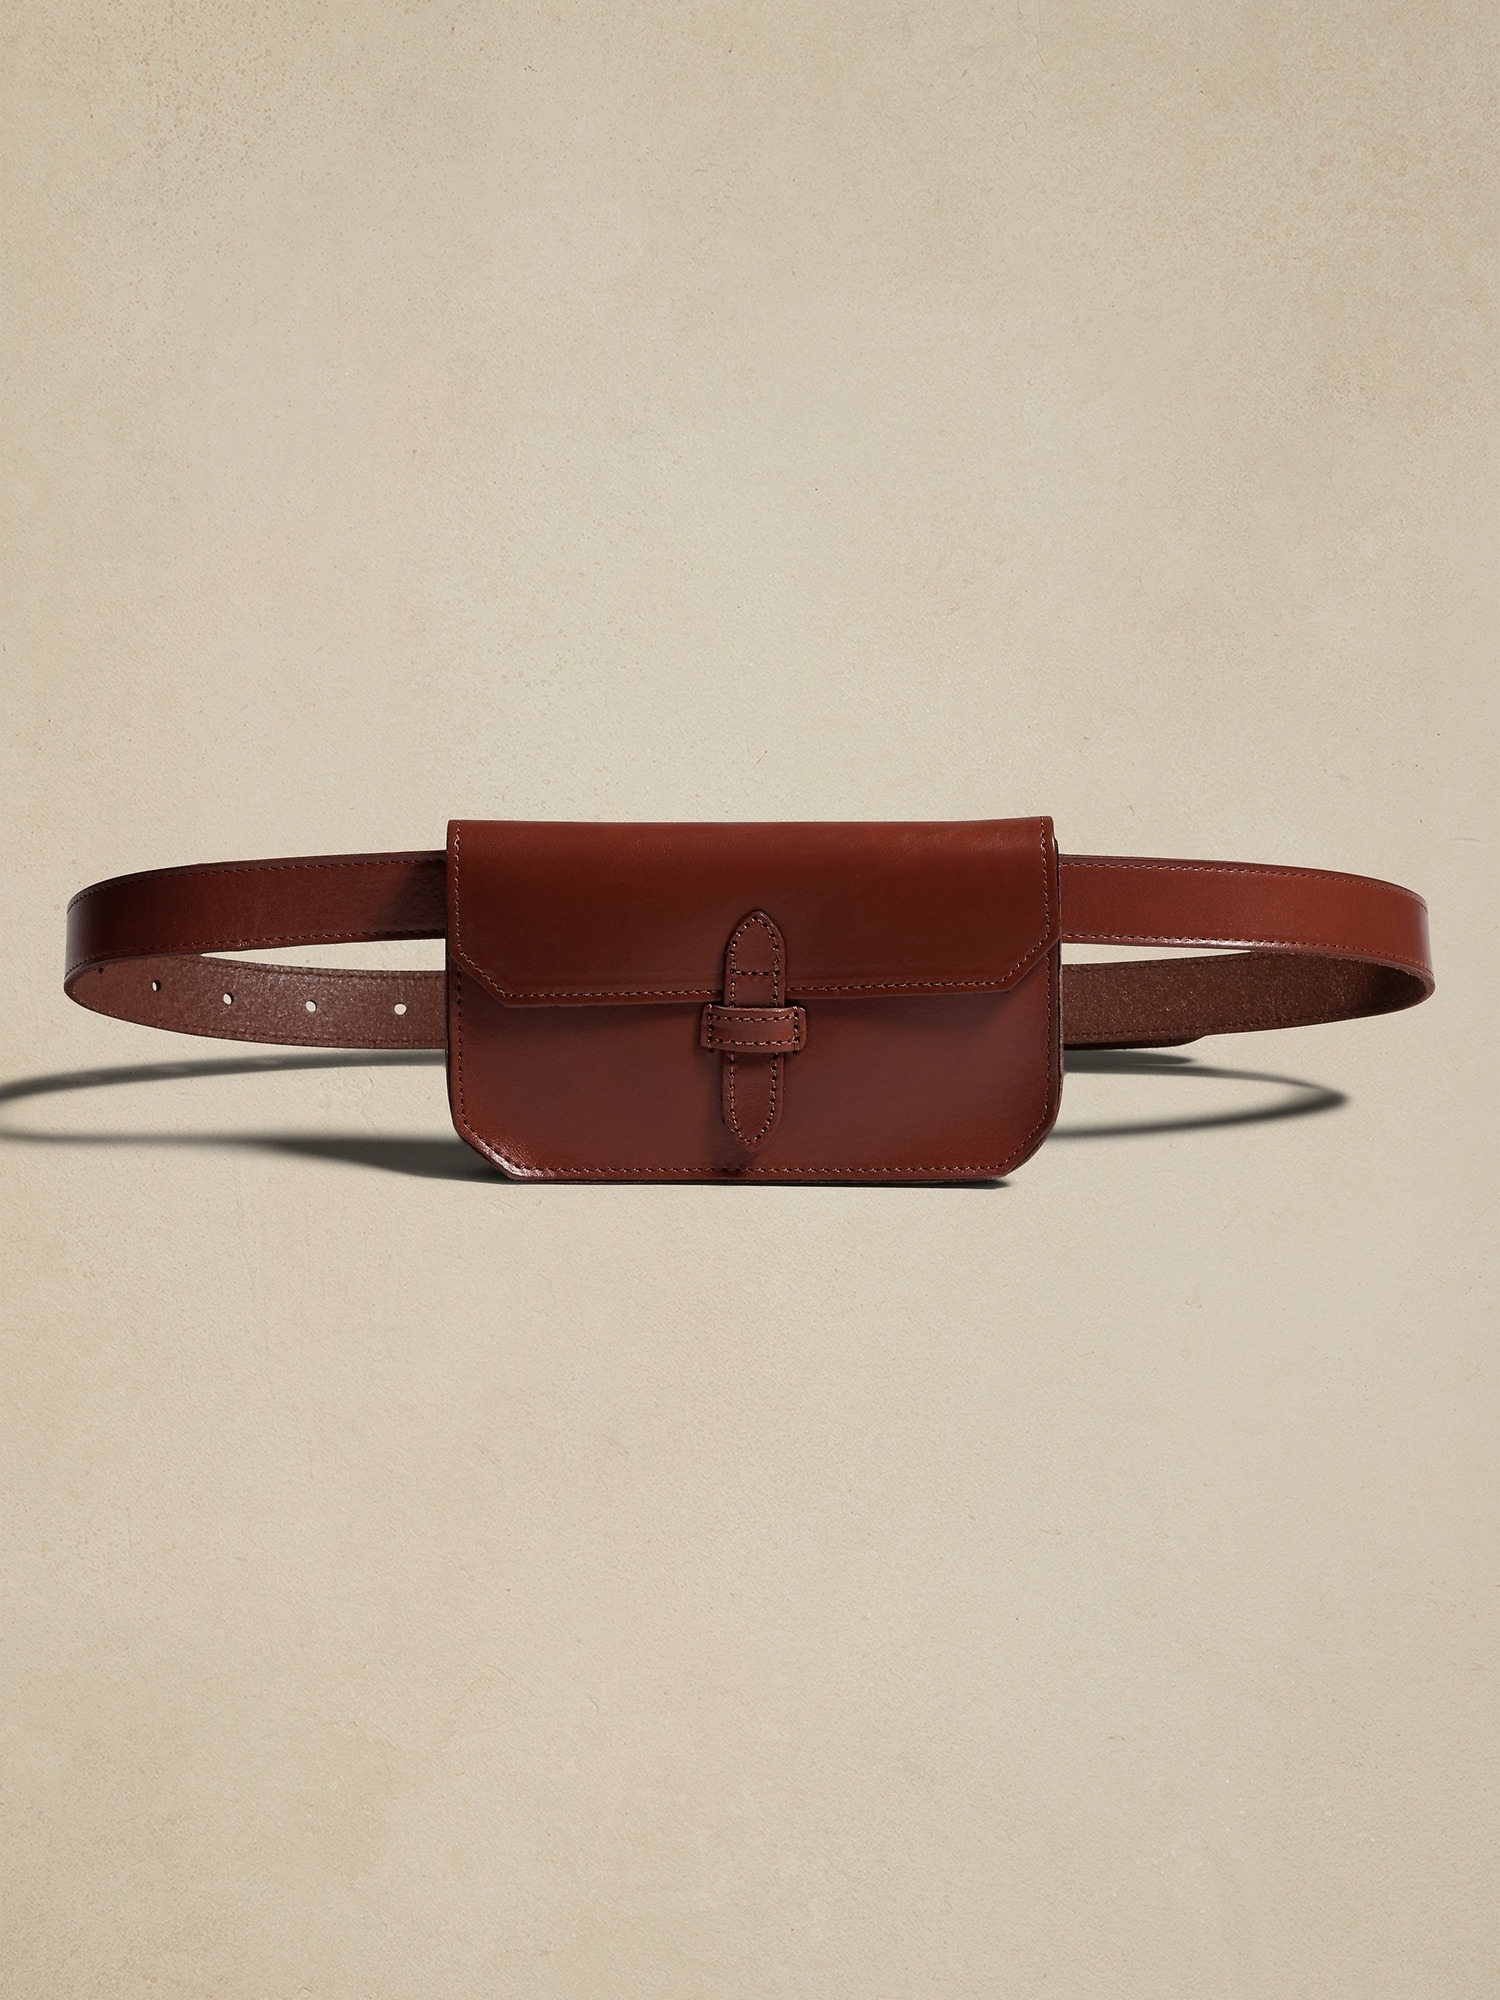 Top 5 Ultra-Luxury Belt Bags to Buy - Academy by FASHIONPHILE